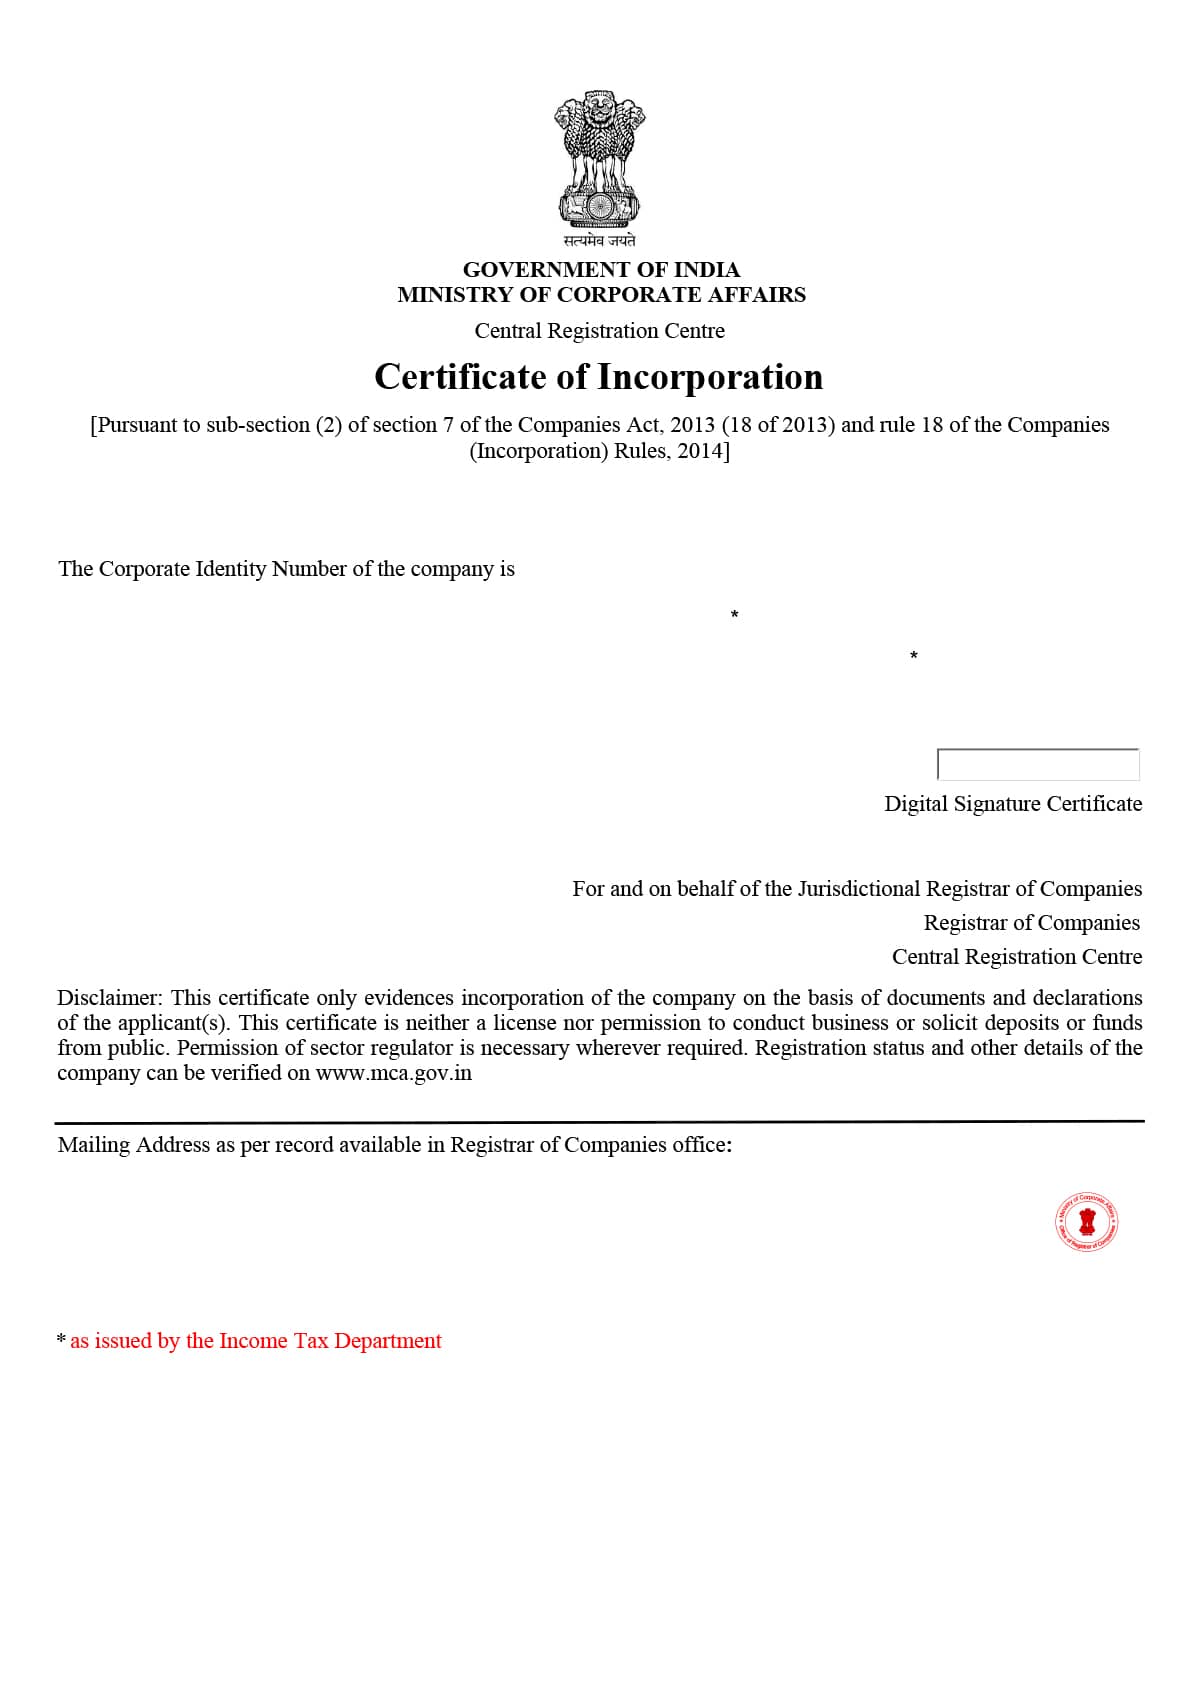 Certifcate of Incorporation